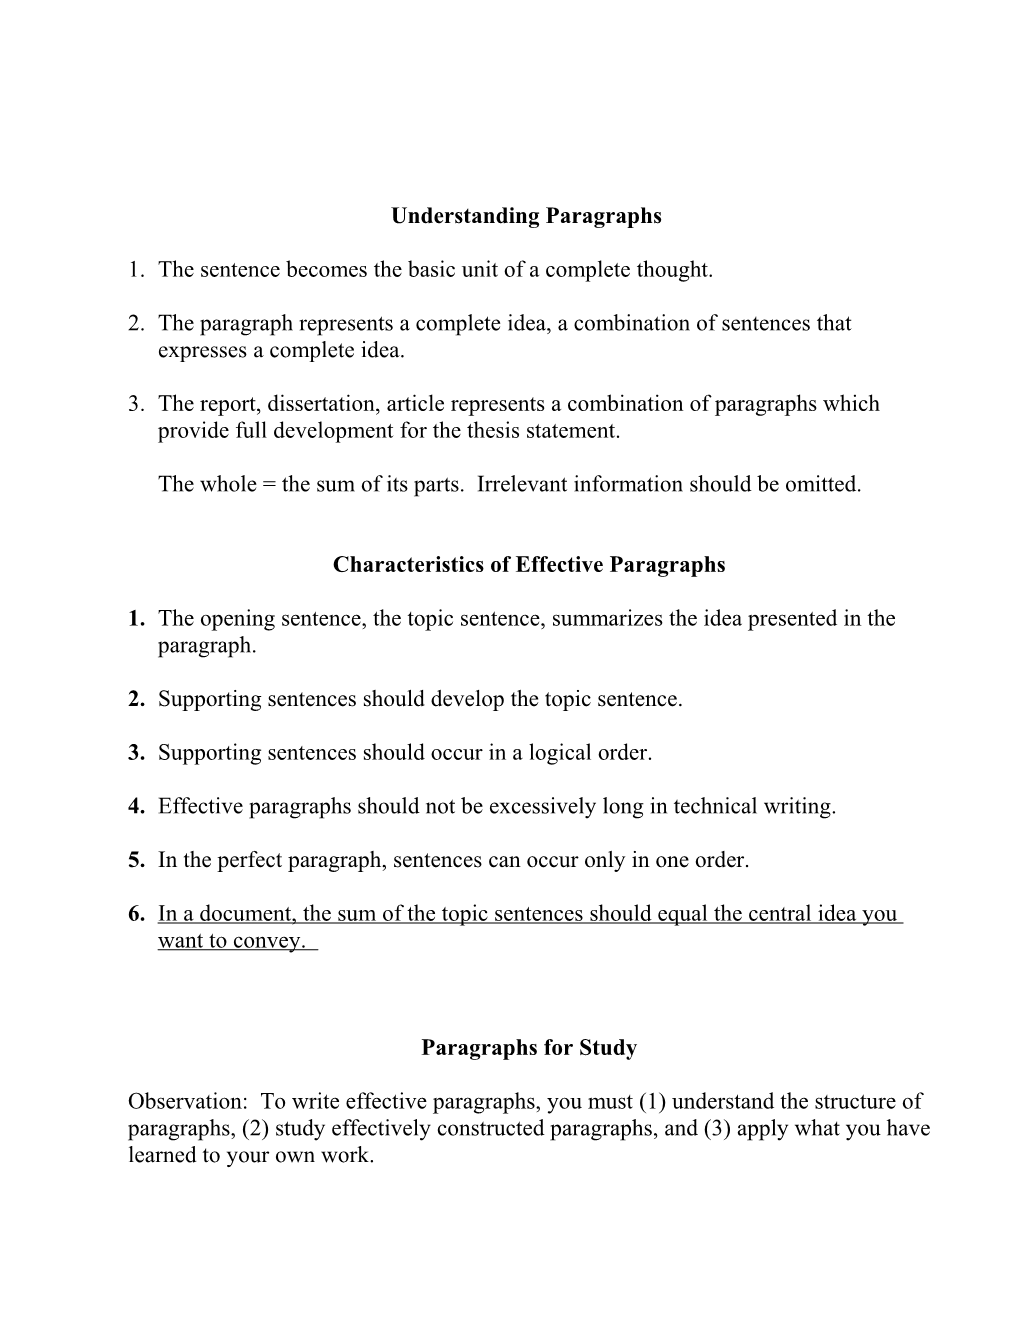 Paragraphs for Study